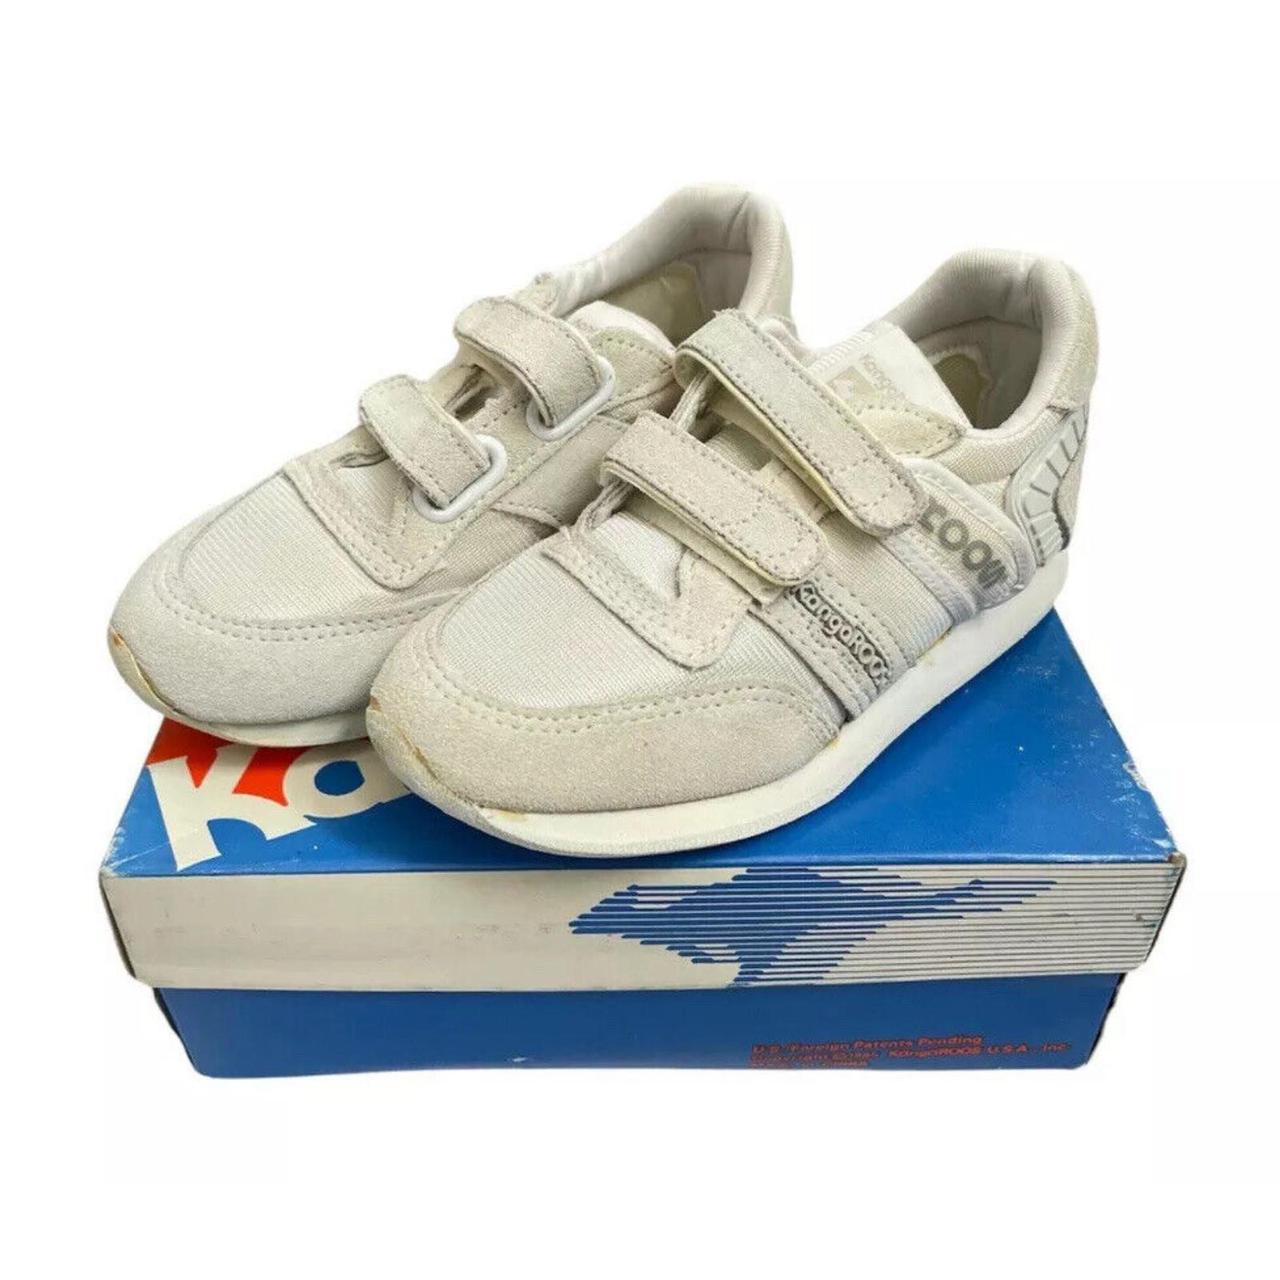 Product Image 2 - vintage roos shoes little kids